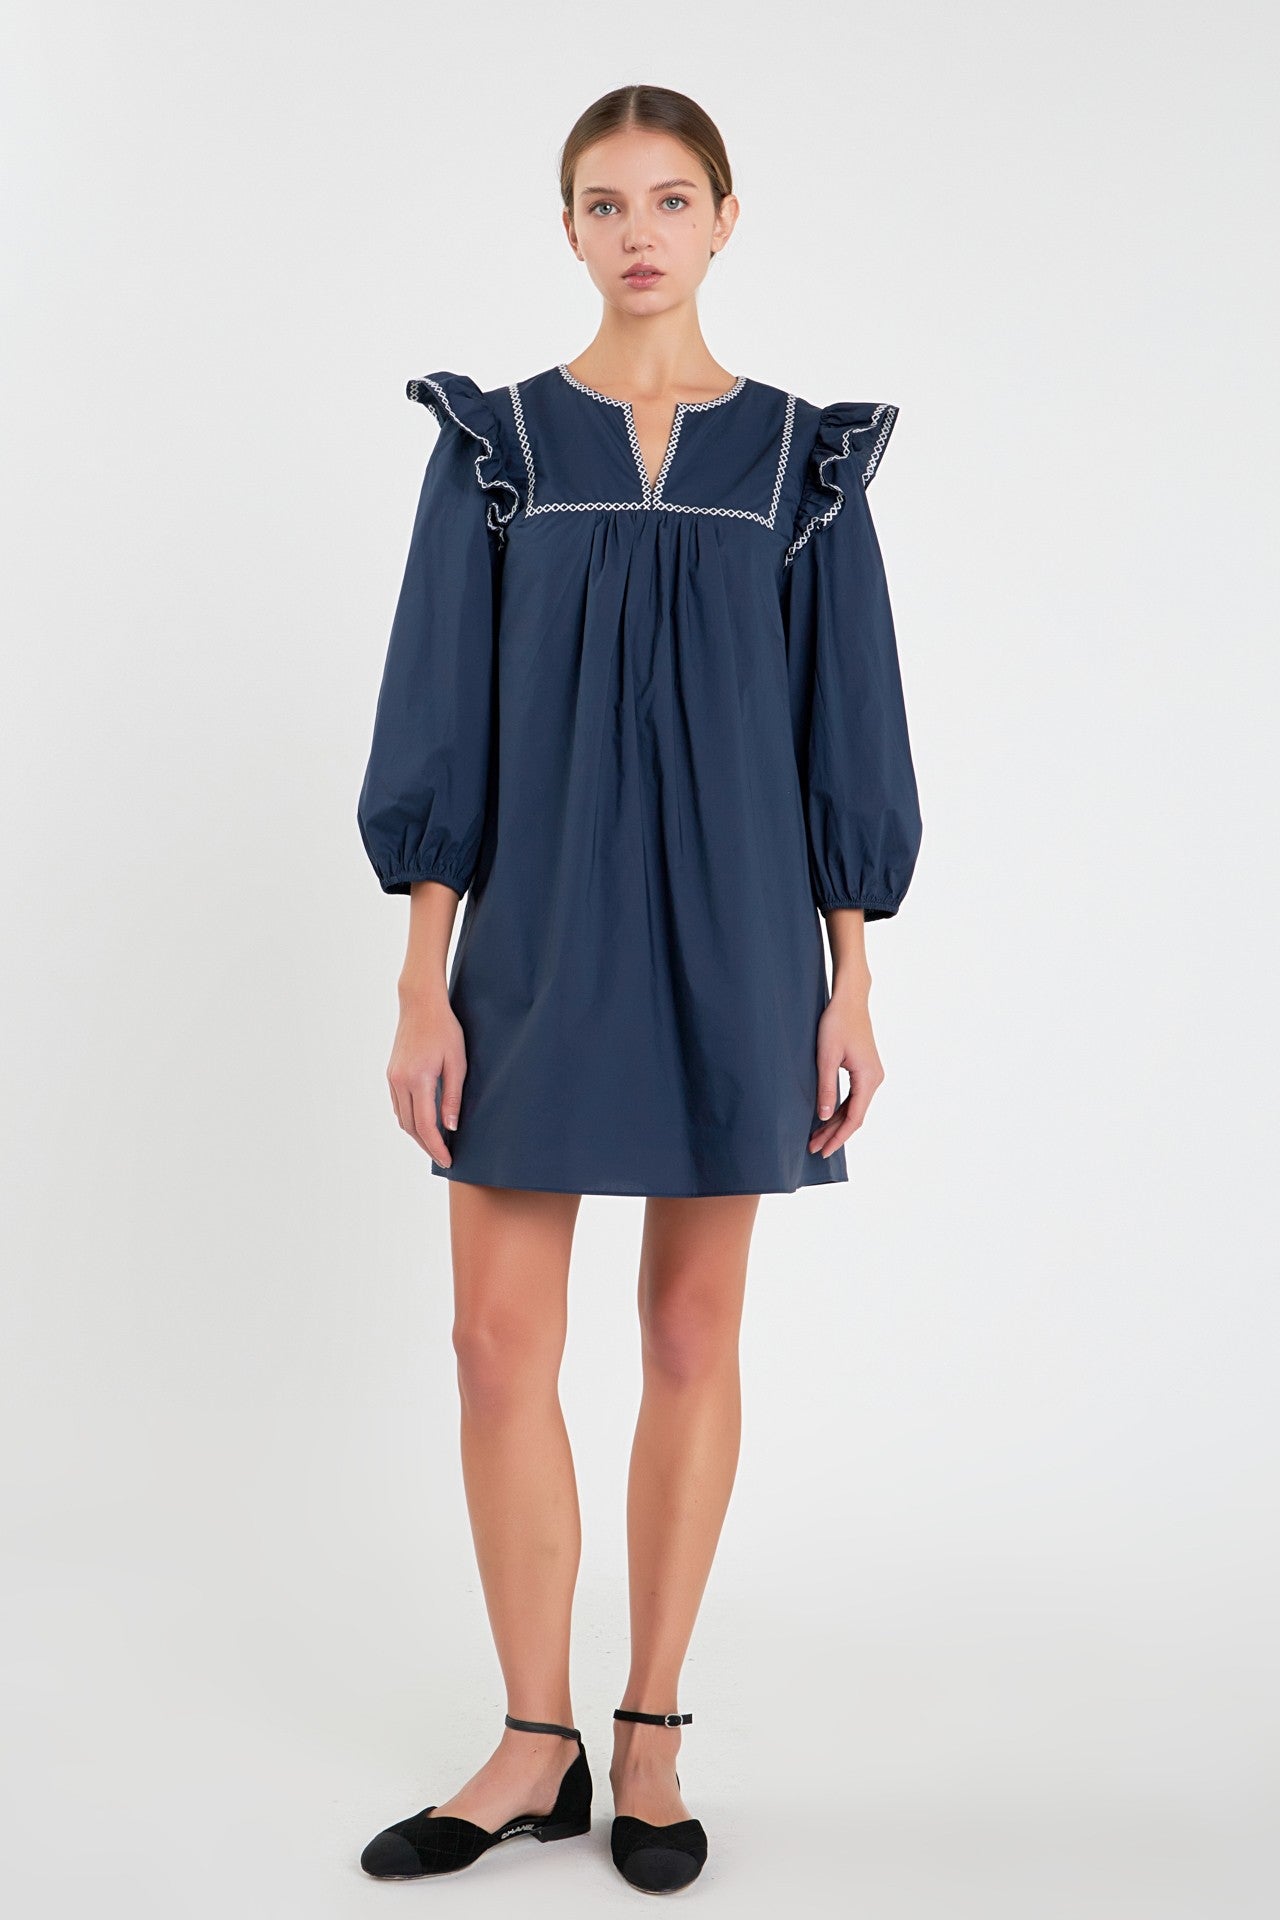 JOSIE CONTRAST EMBROIDERED MINI DRESS IN NAVY & WHITE